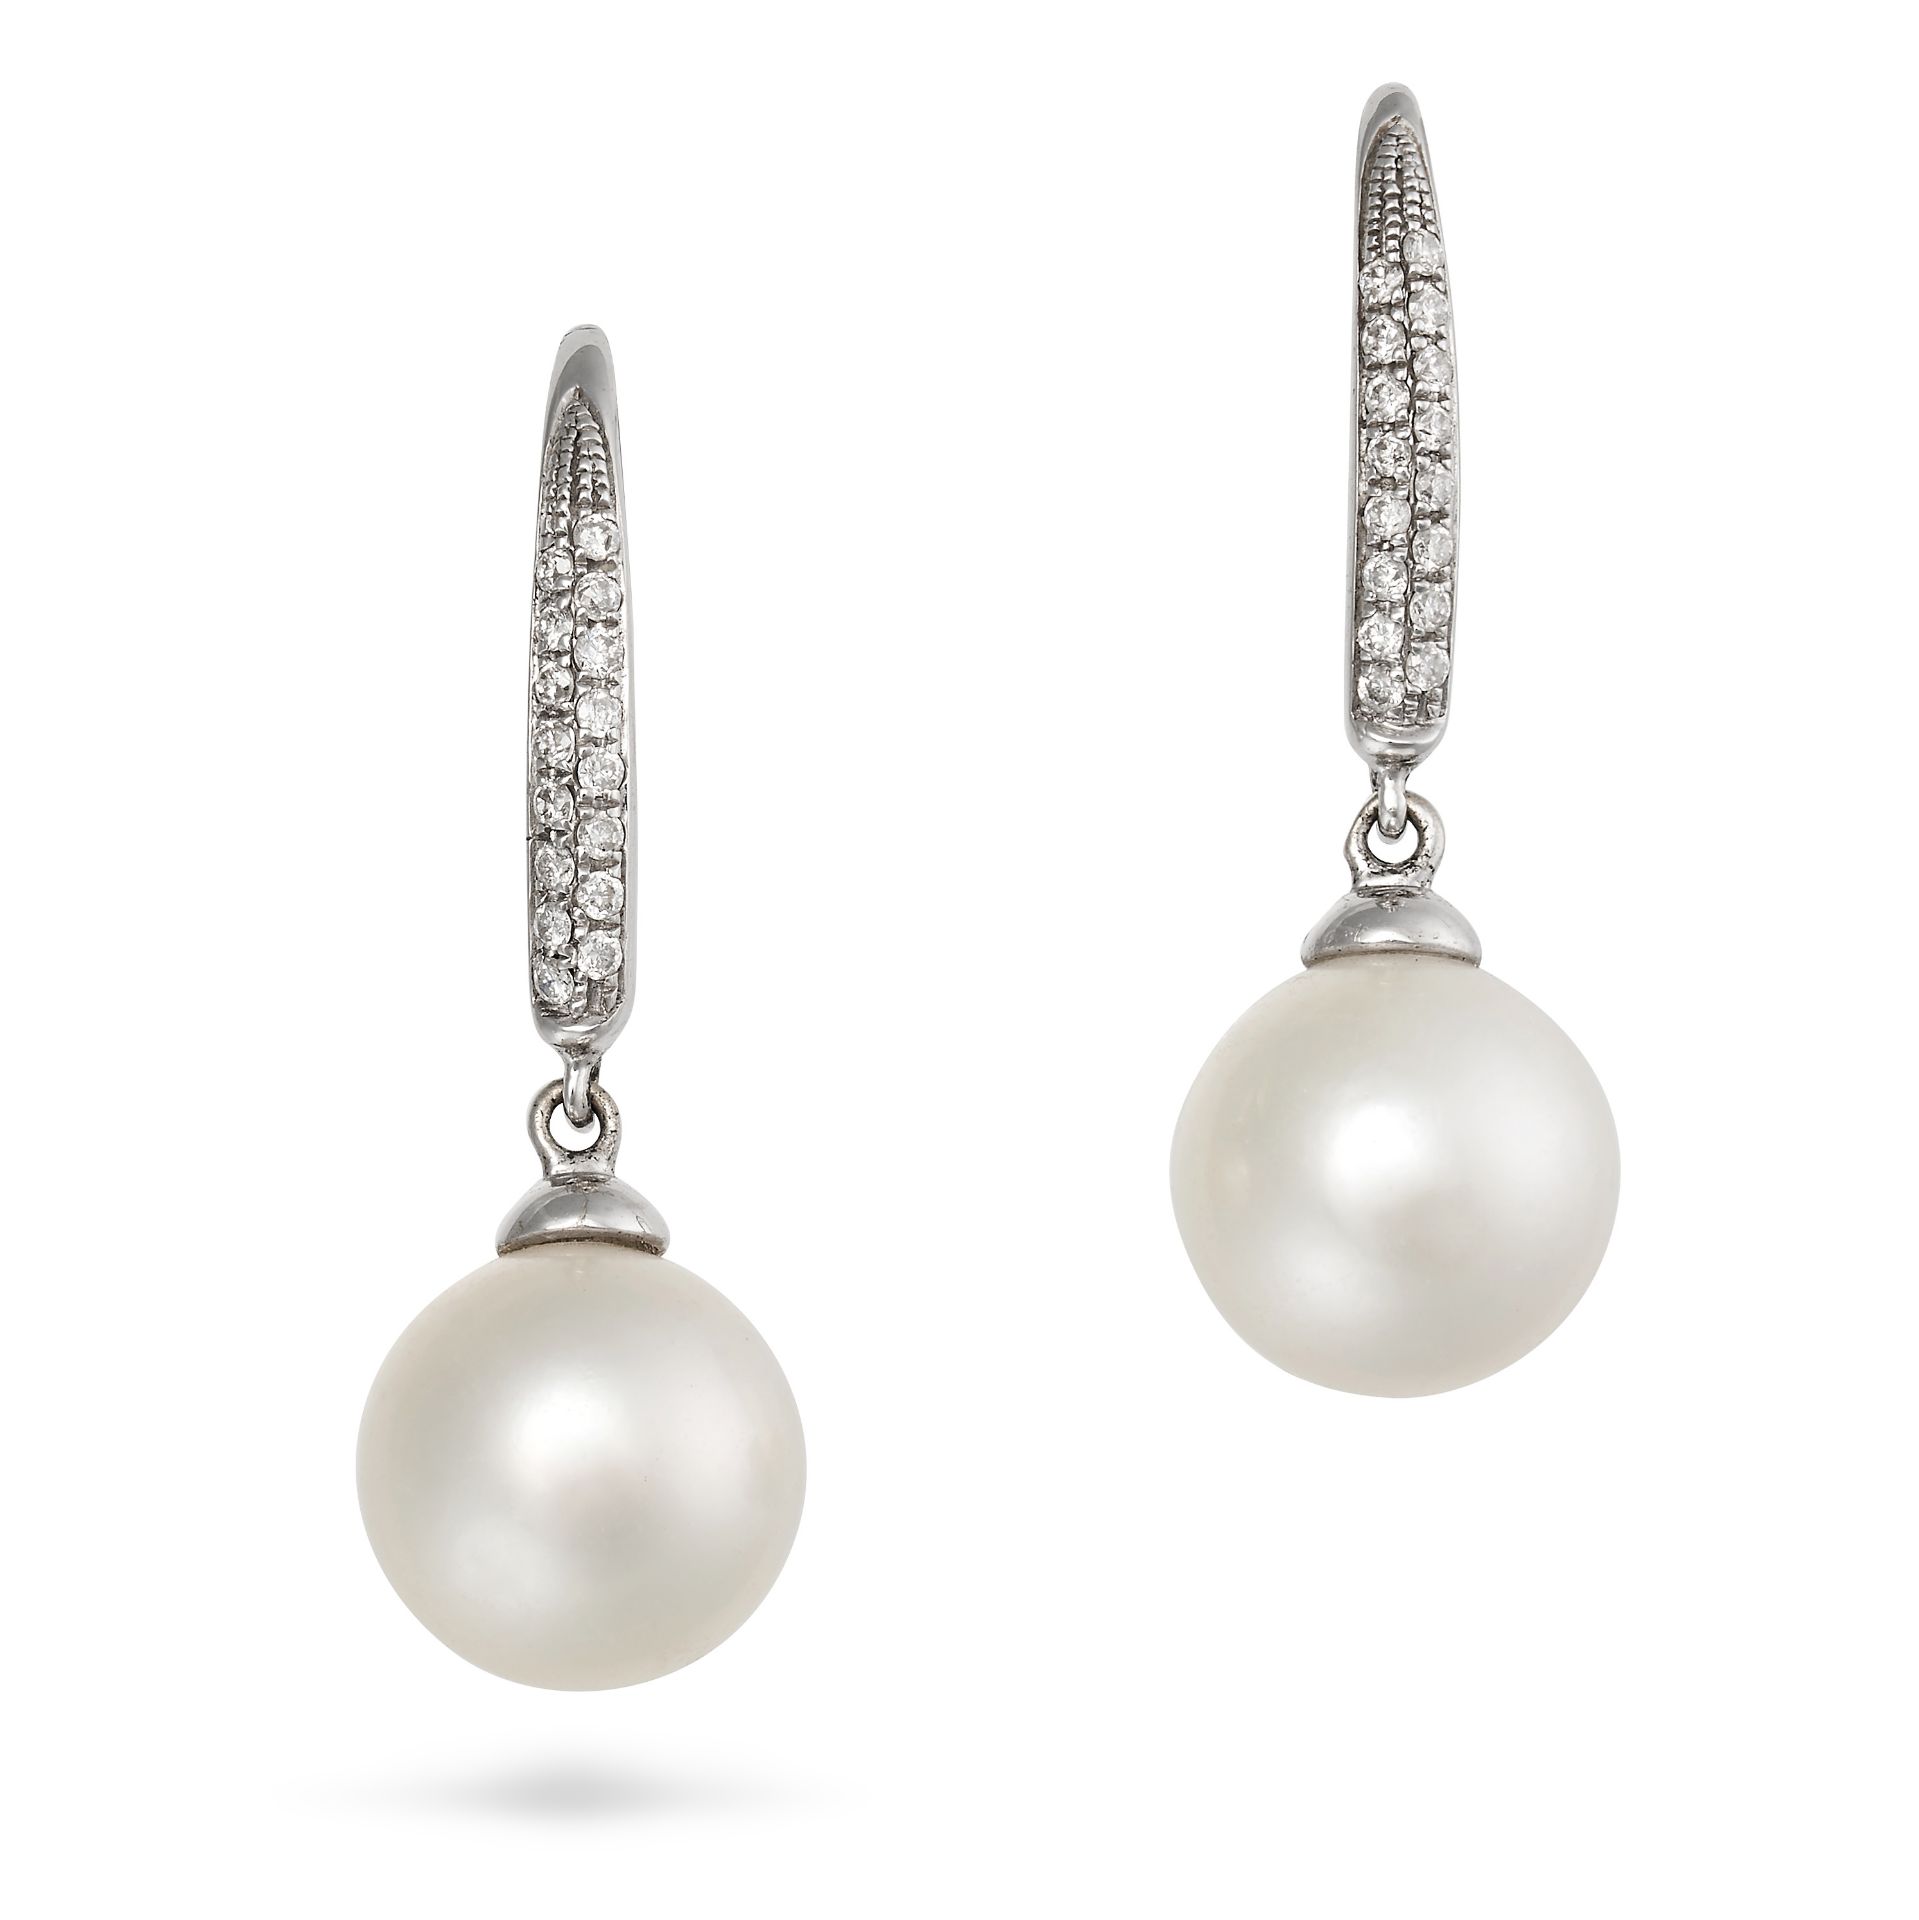 A PAIR OF PEARL AND DIAMOND DROP EARRINGS in 18ct white gold, each earring designed as line of ro...